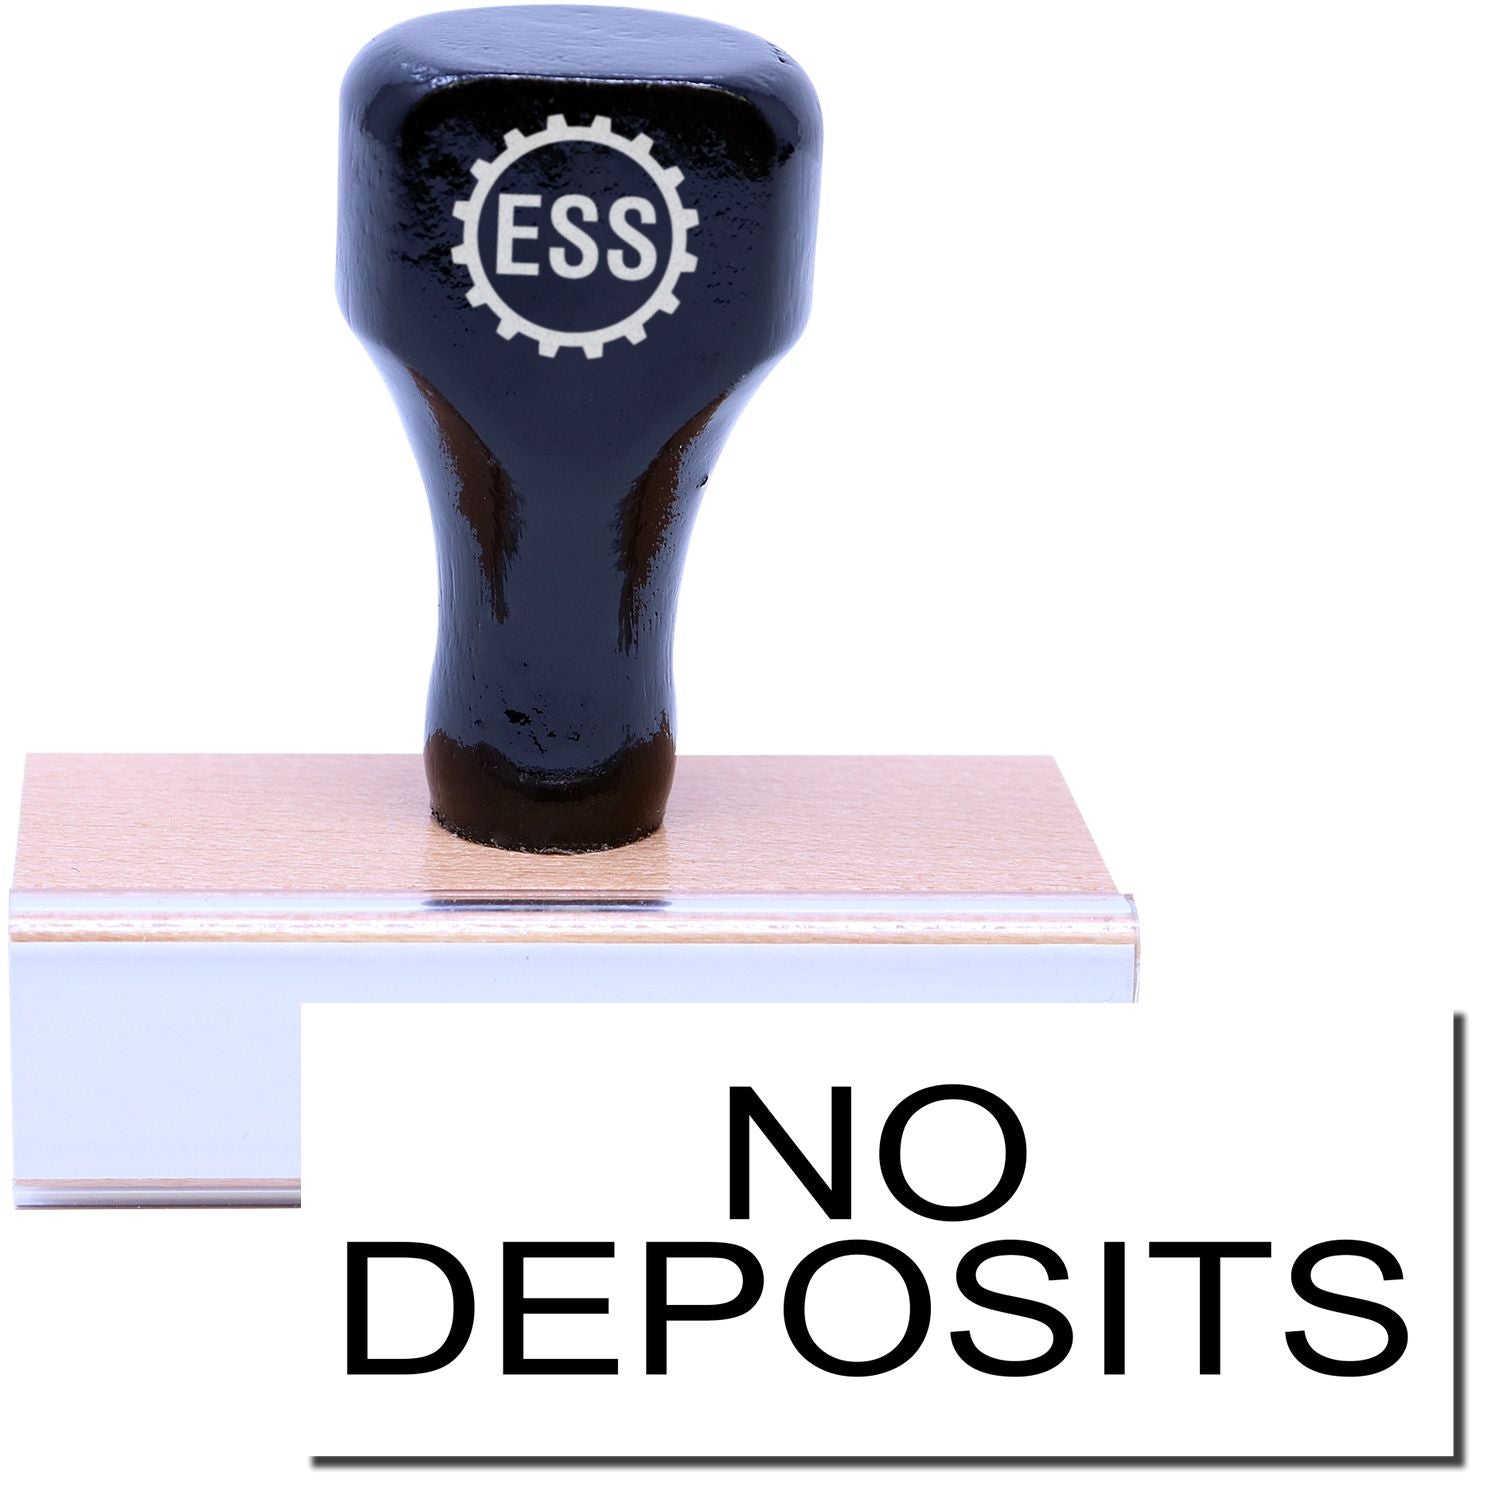 A stock office rubber stamp with a stamped image showing how the text "NO DEPOSITS" in a large font is displayed after stamping.